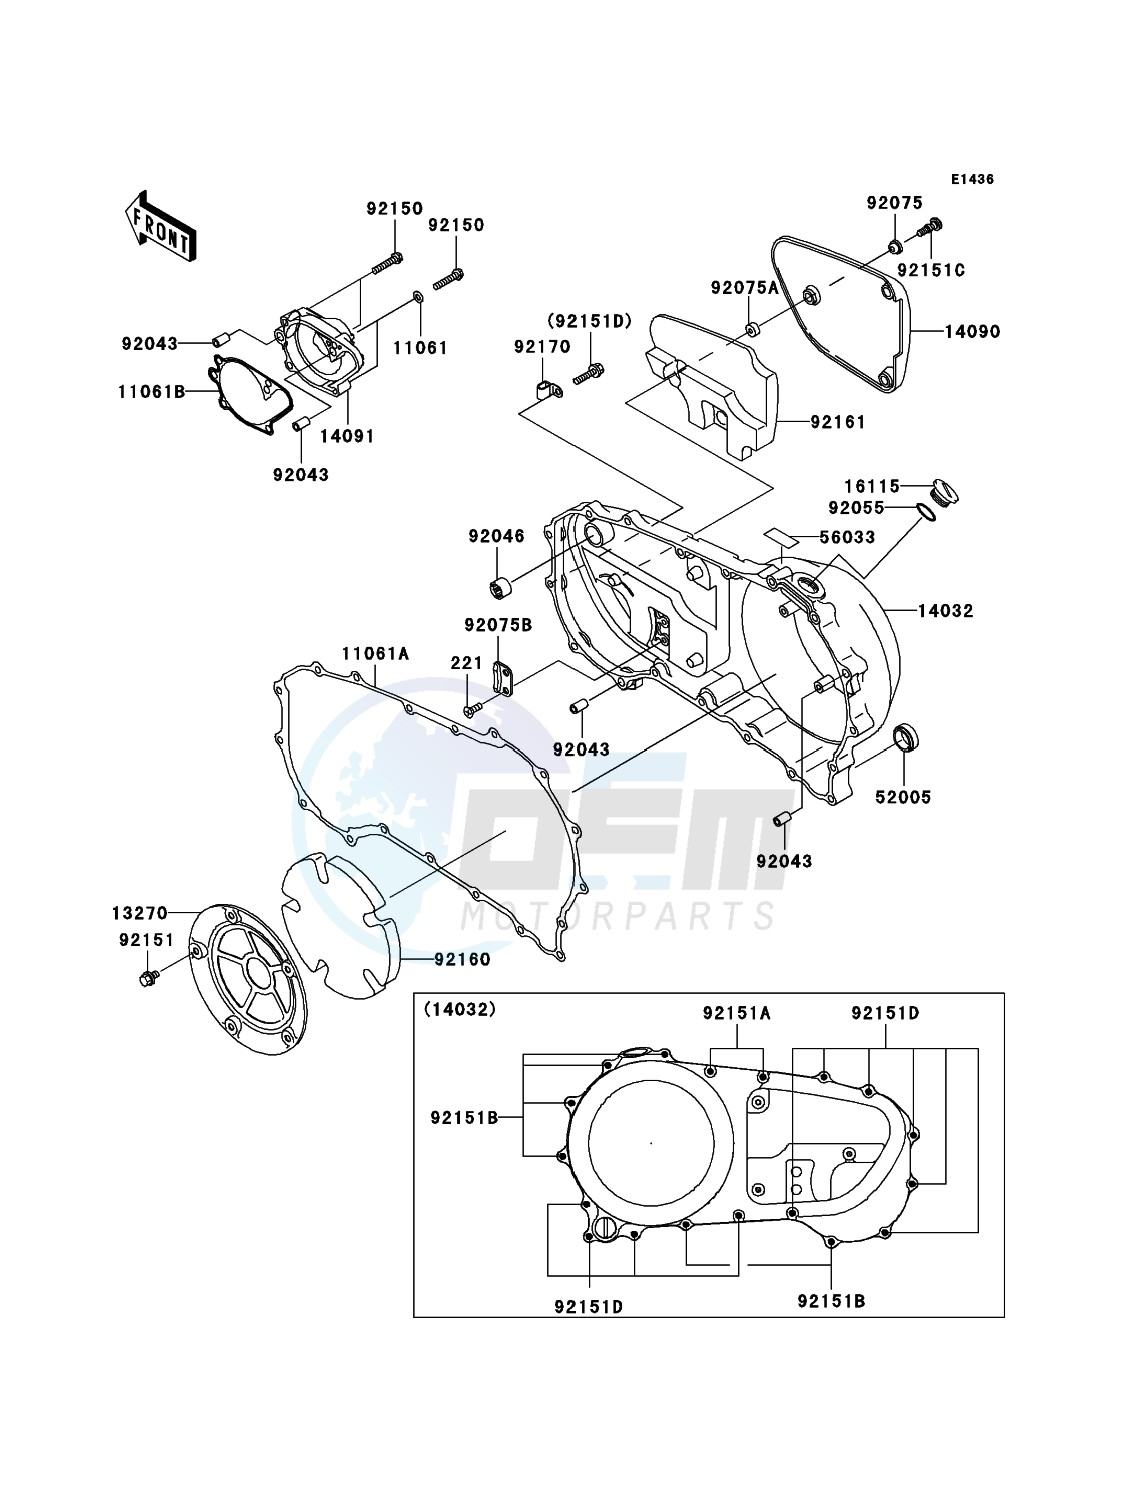 Right Engine Cover(s) blueprint